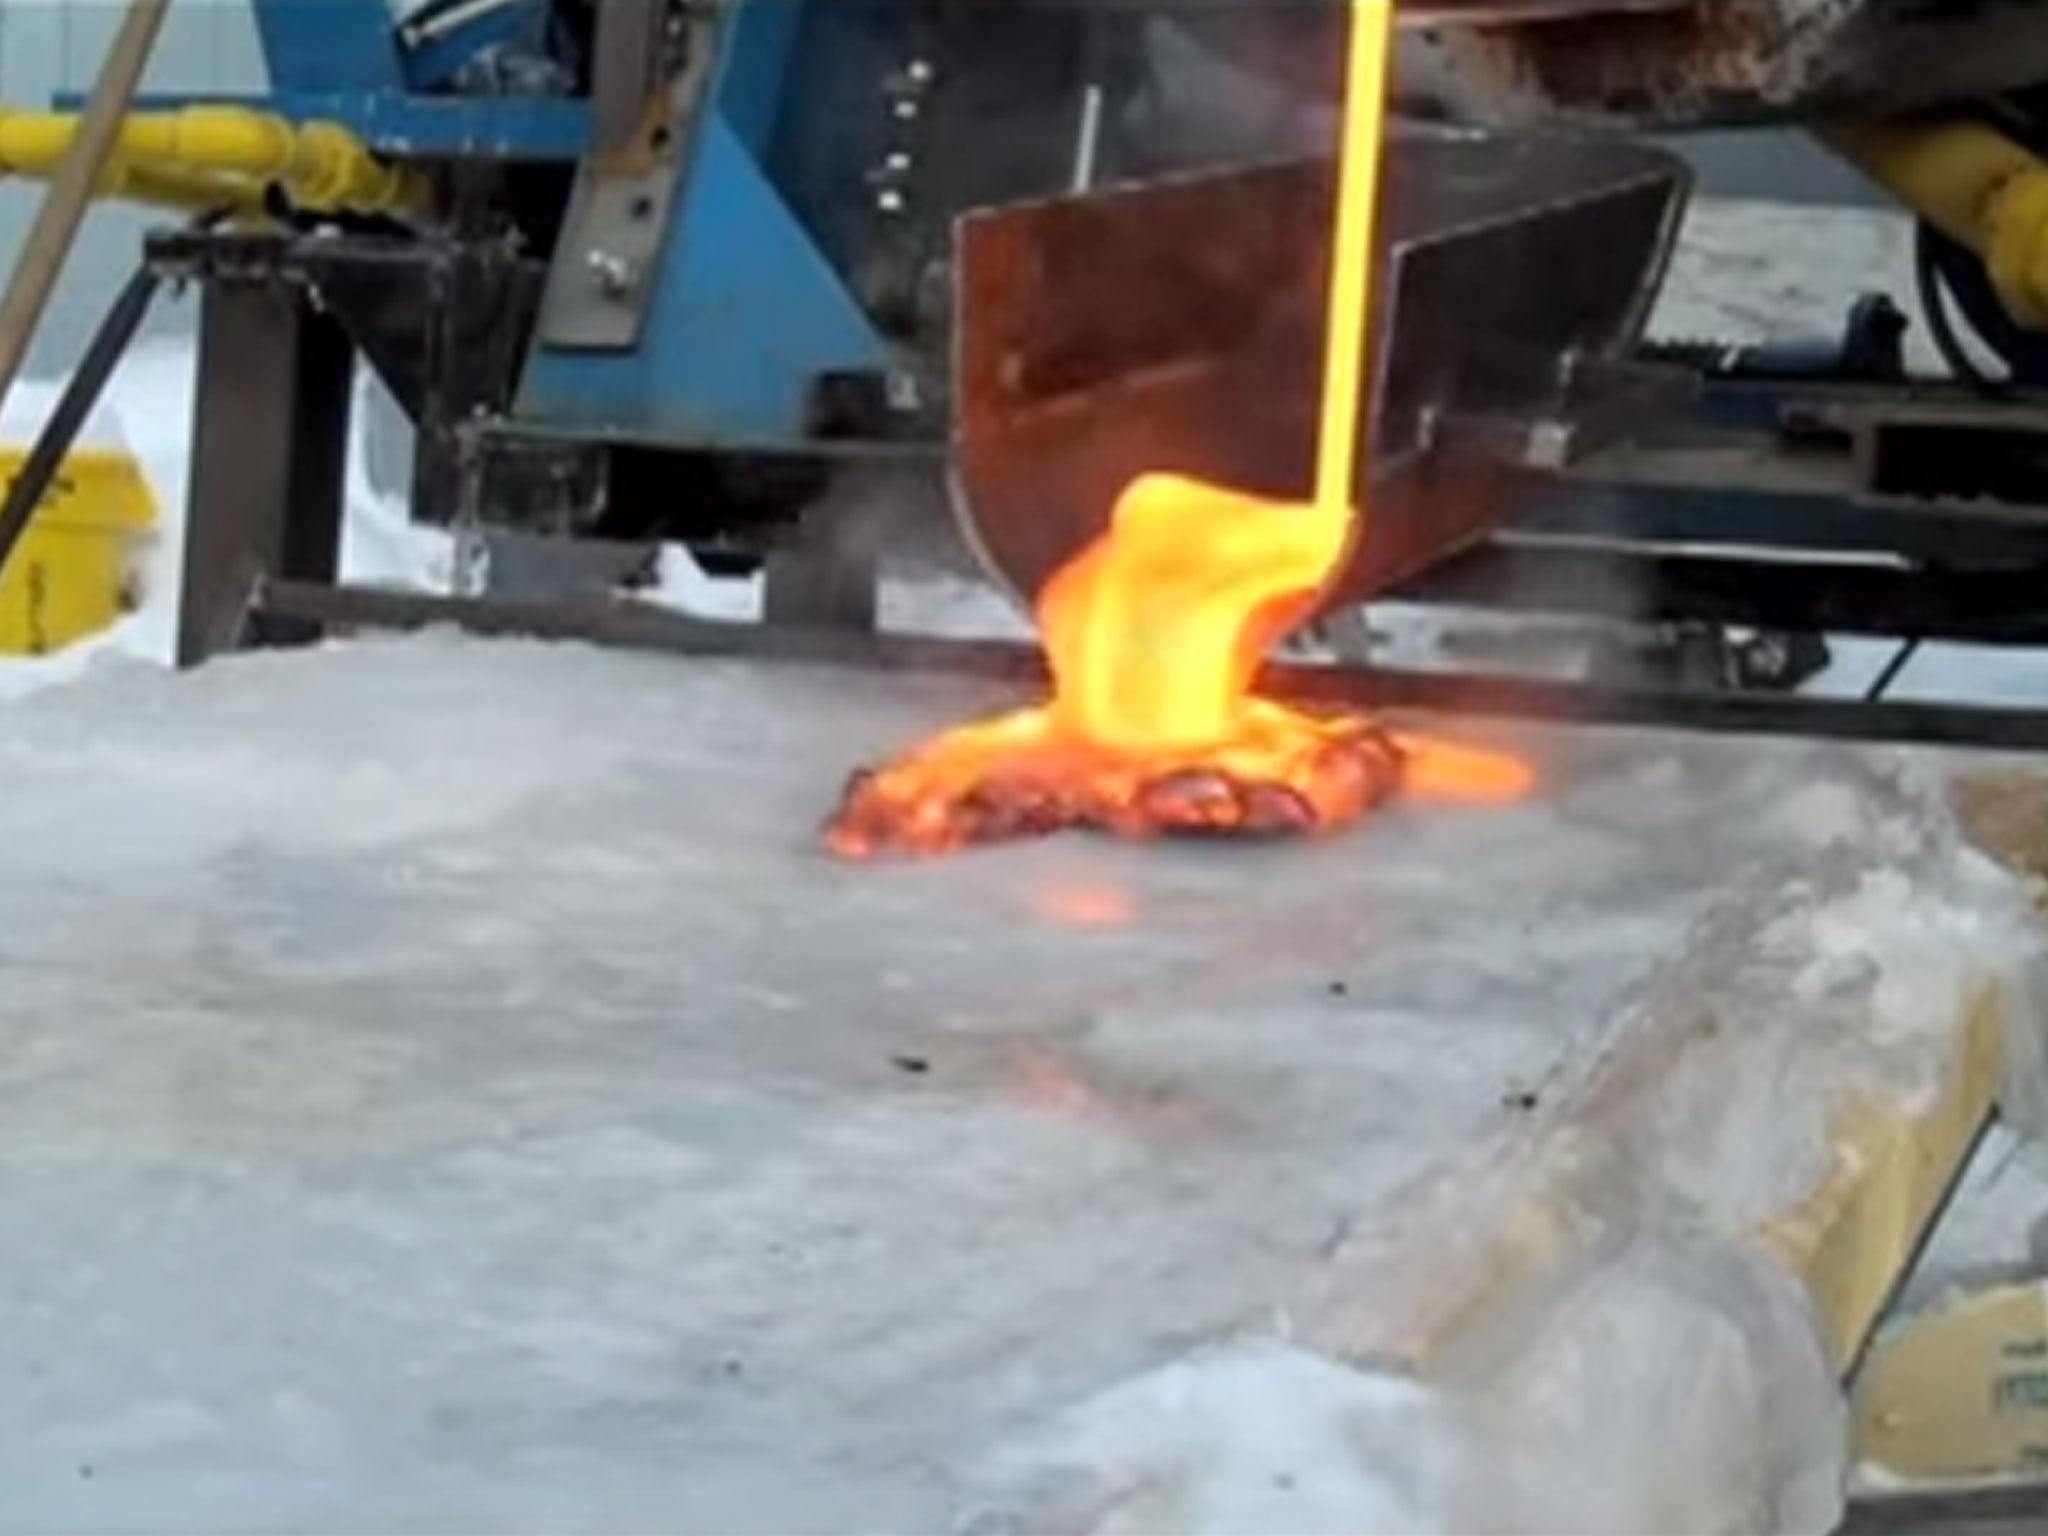 Lava being poured on ice.